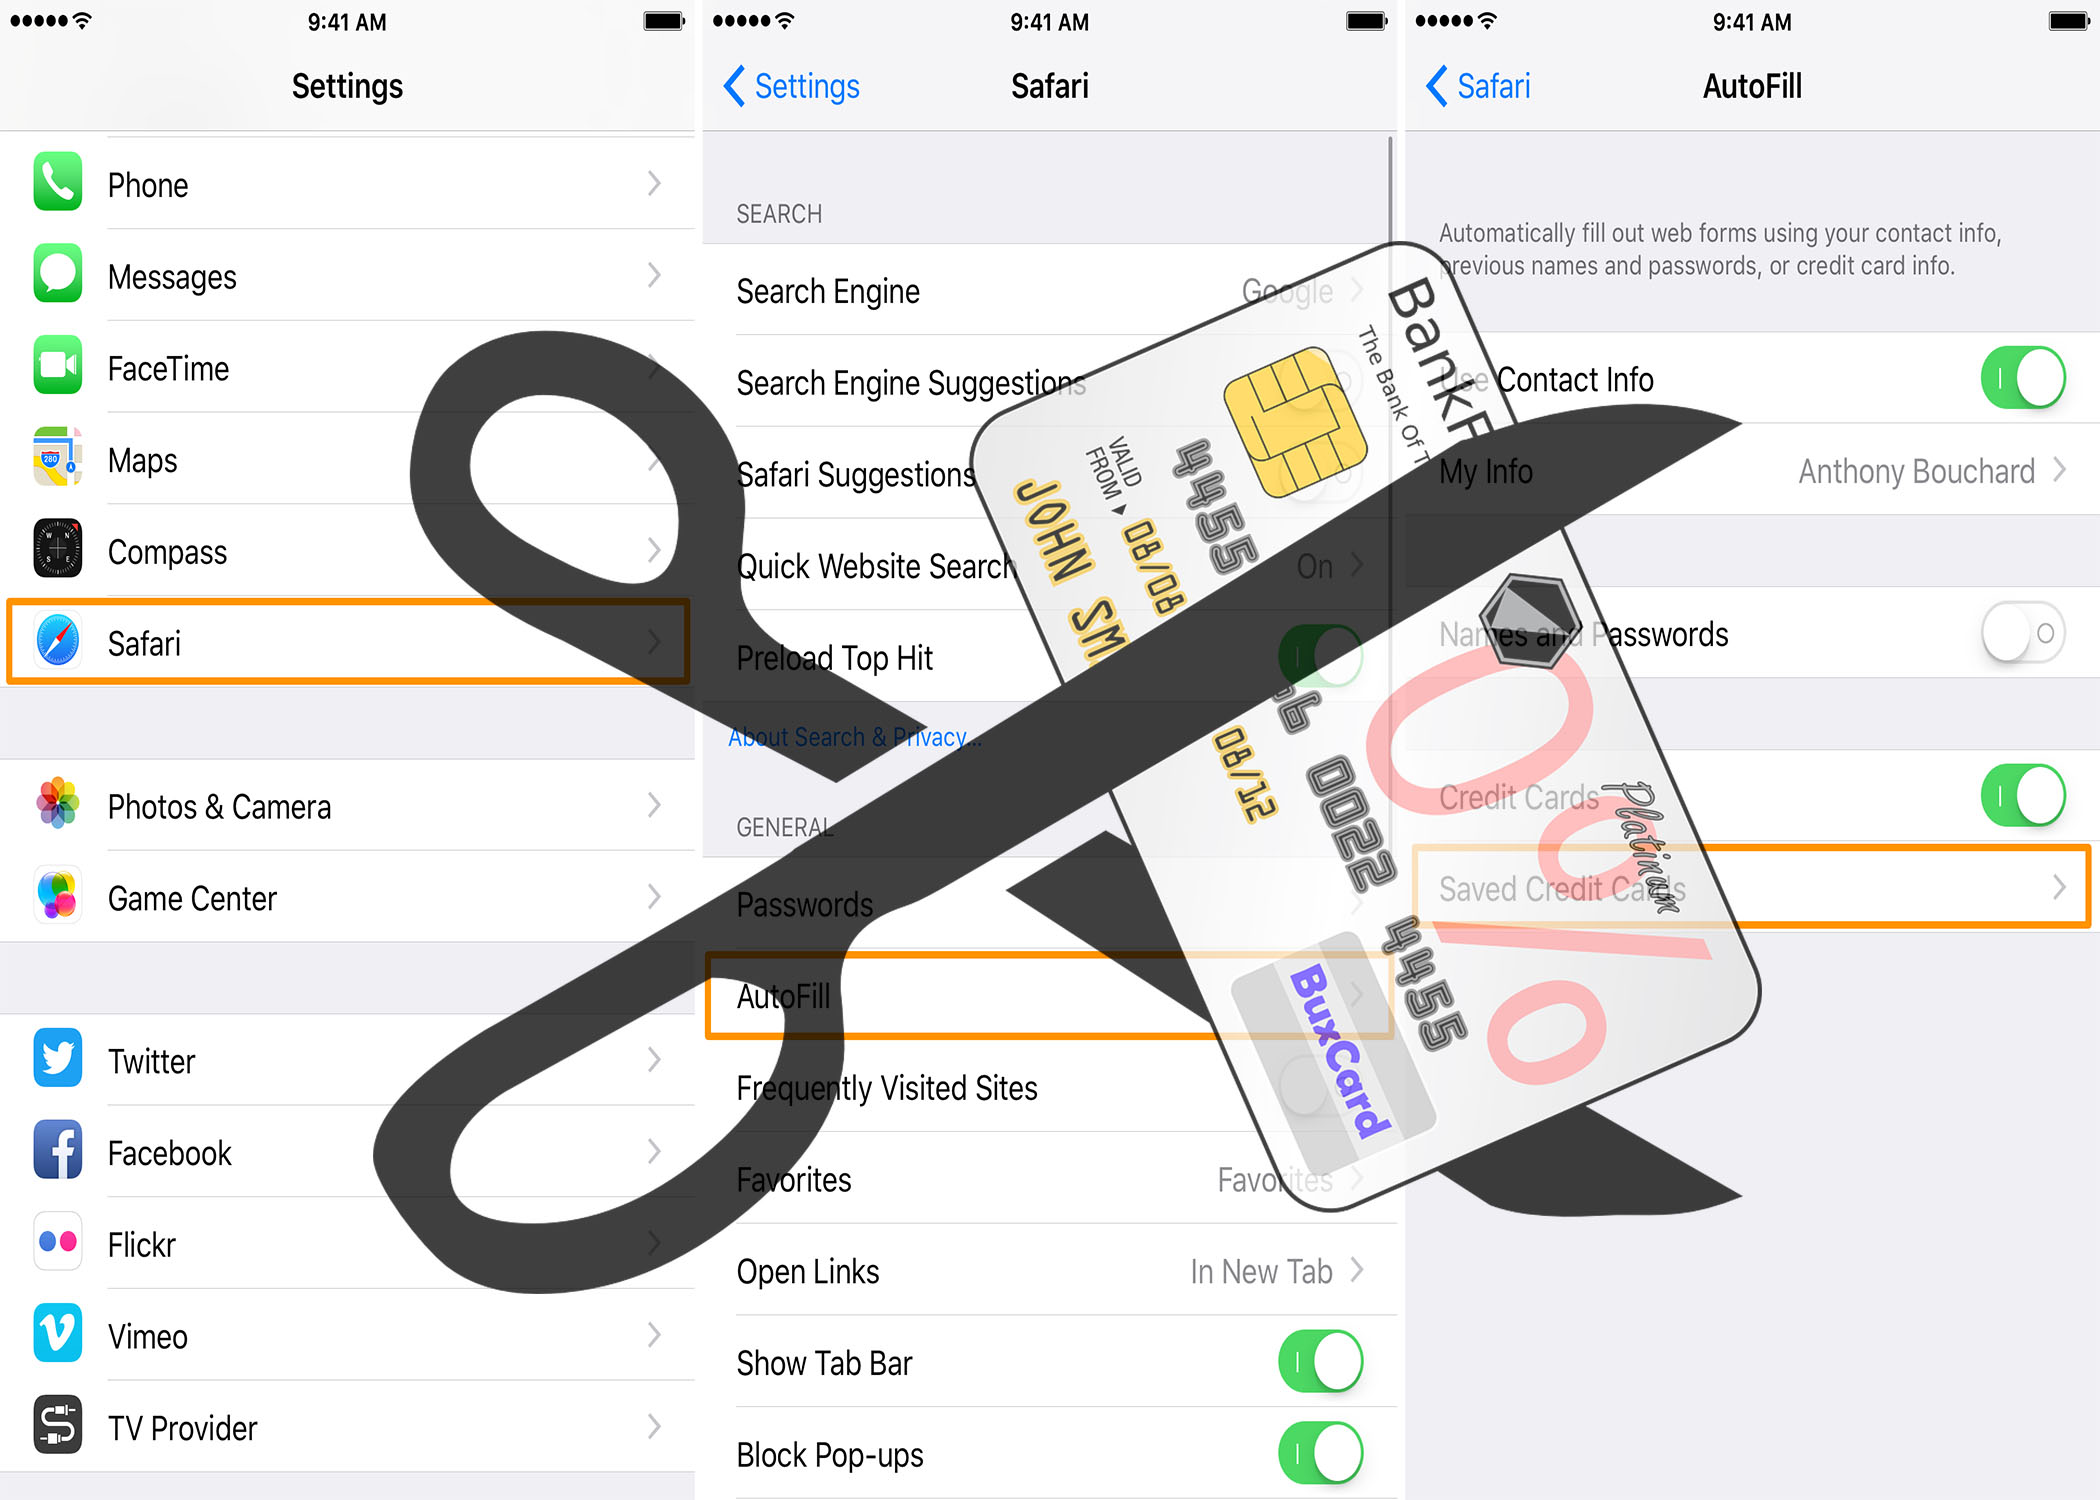 How To Remove Your Credit Card Information from an iPhone